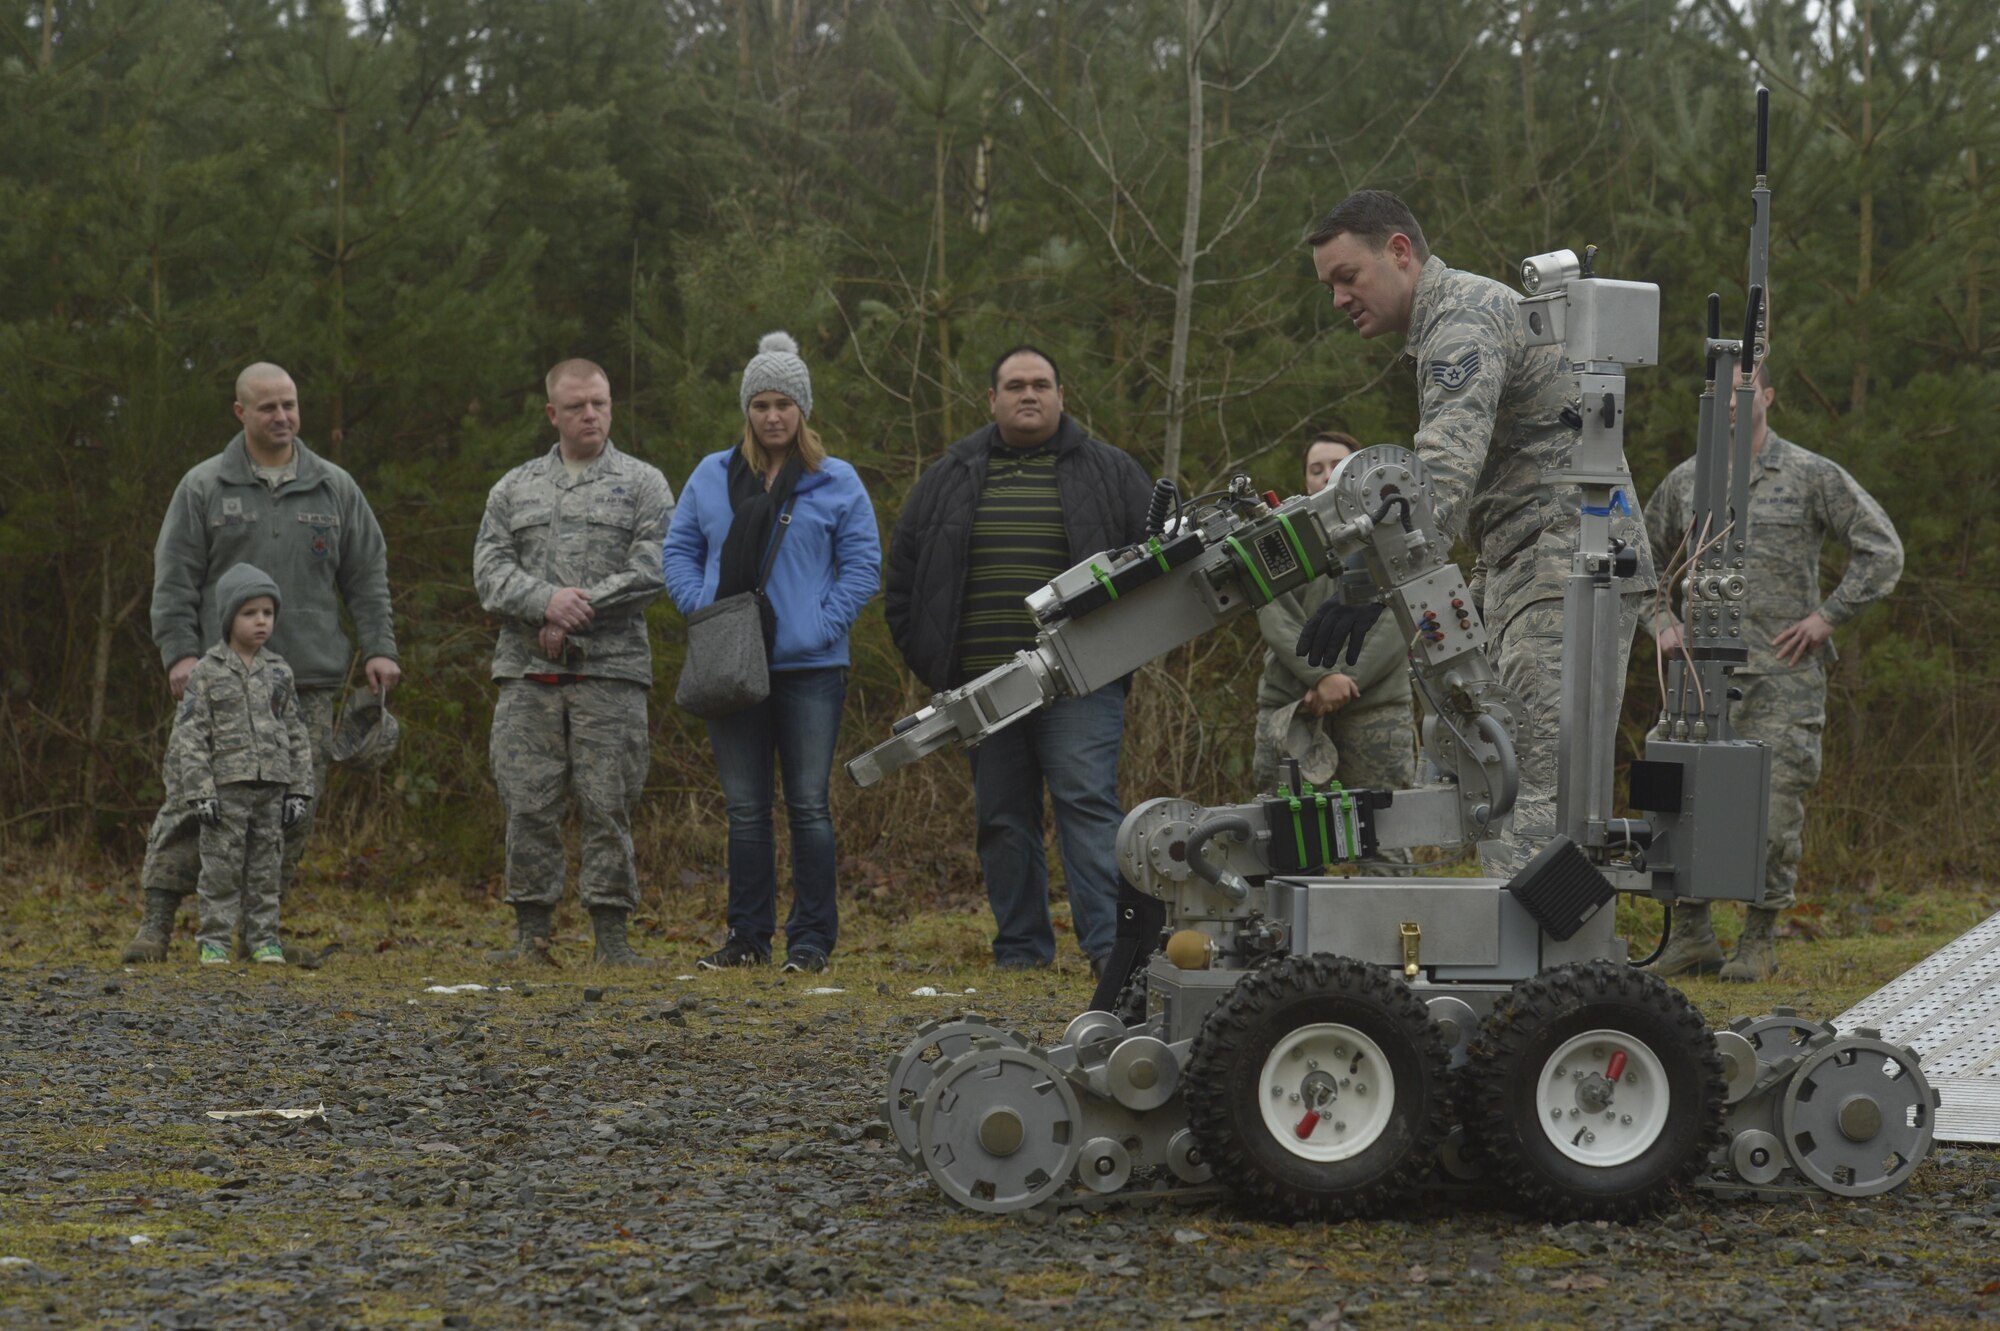 Annual award nominees watch a demonstration by Staff Sgt. Cole Carroll, 52nd Civil Engineer Squadron explosive ordnance disposal, on Spangdahlem Air Base, Germany, Feb. 2, 2017. The nominees were given a base tour which included the fire department, military working dogs and EOD. (U.S. Air Force photo by Staff Sgt. Jonathan Snyder)